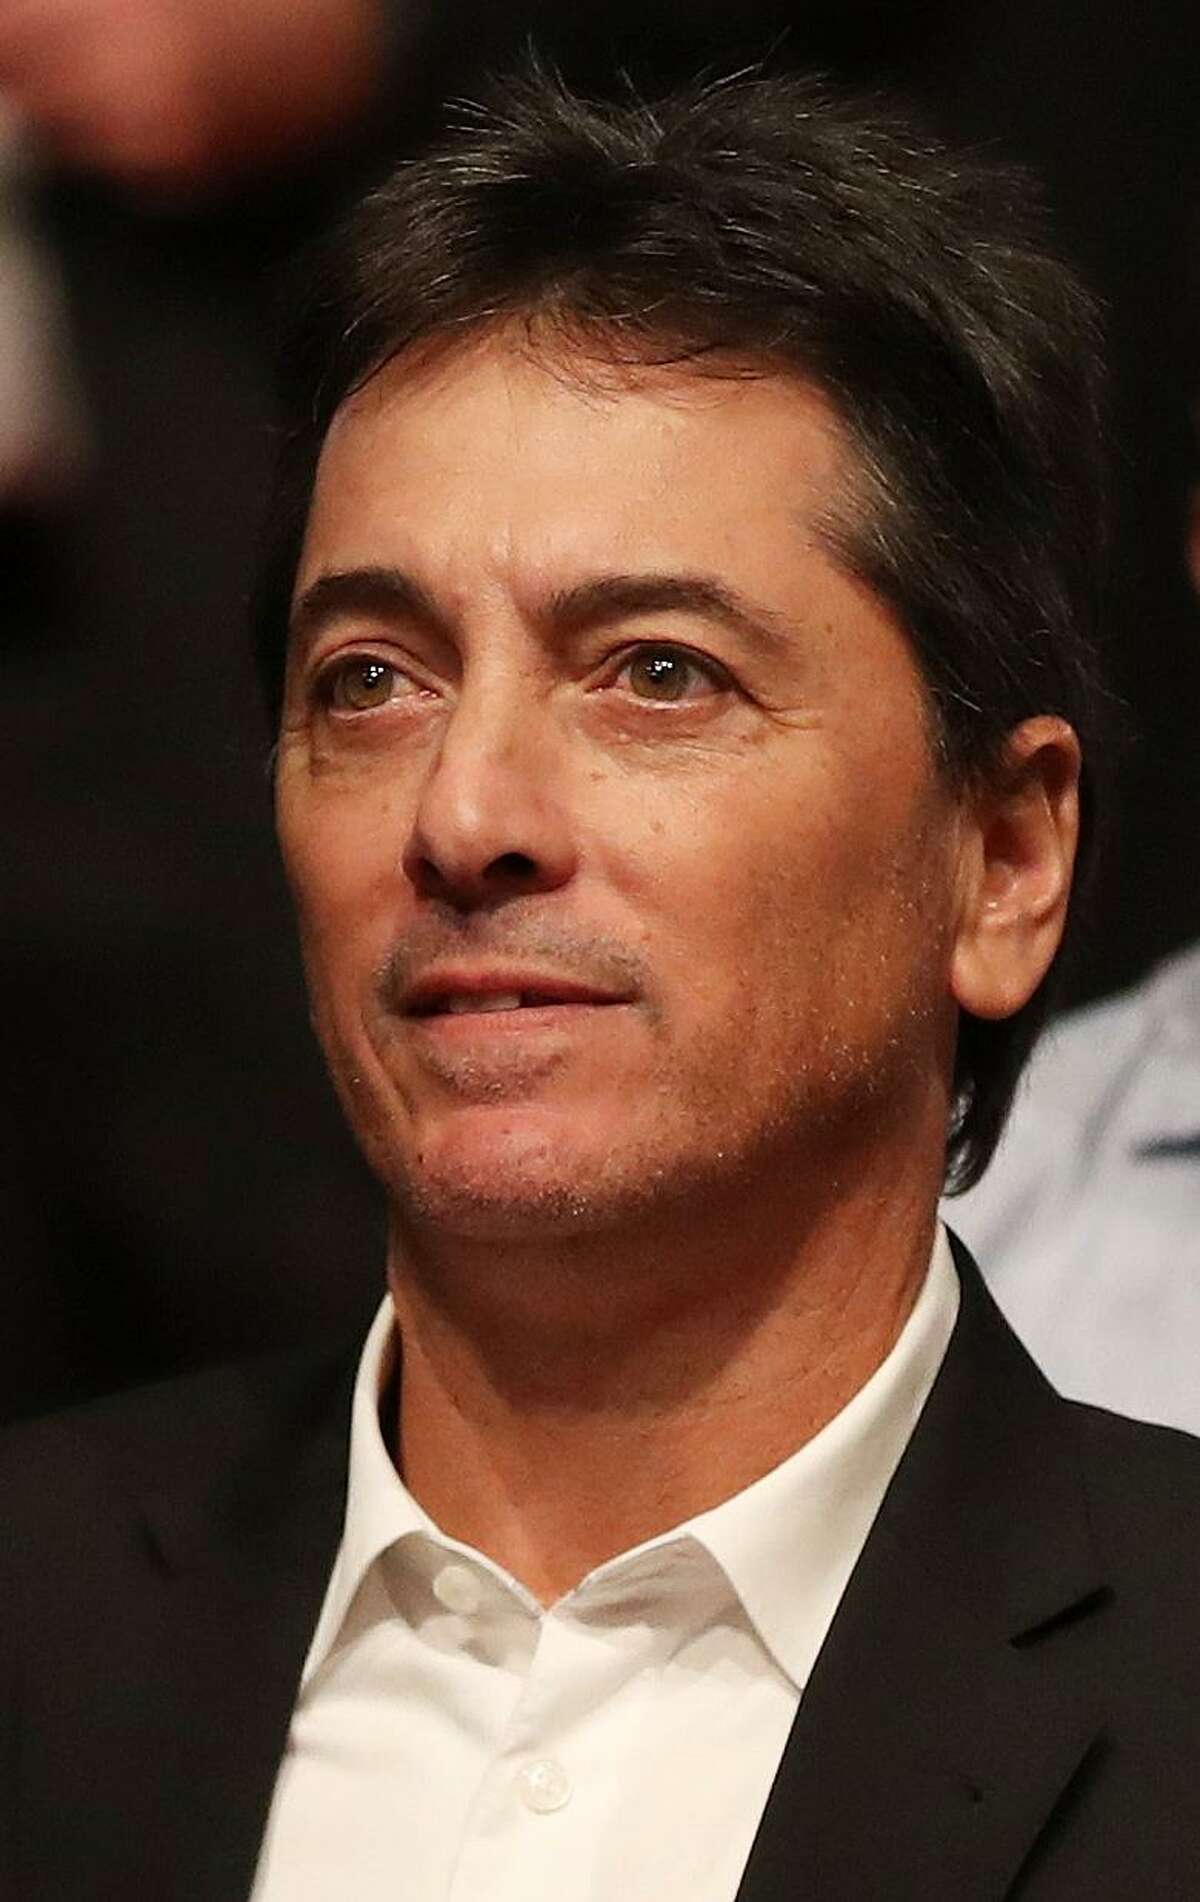 Actor Scott Baio outrages Newtown victims’ families on Twitter